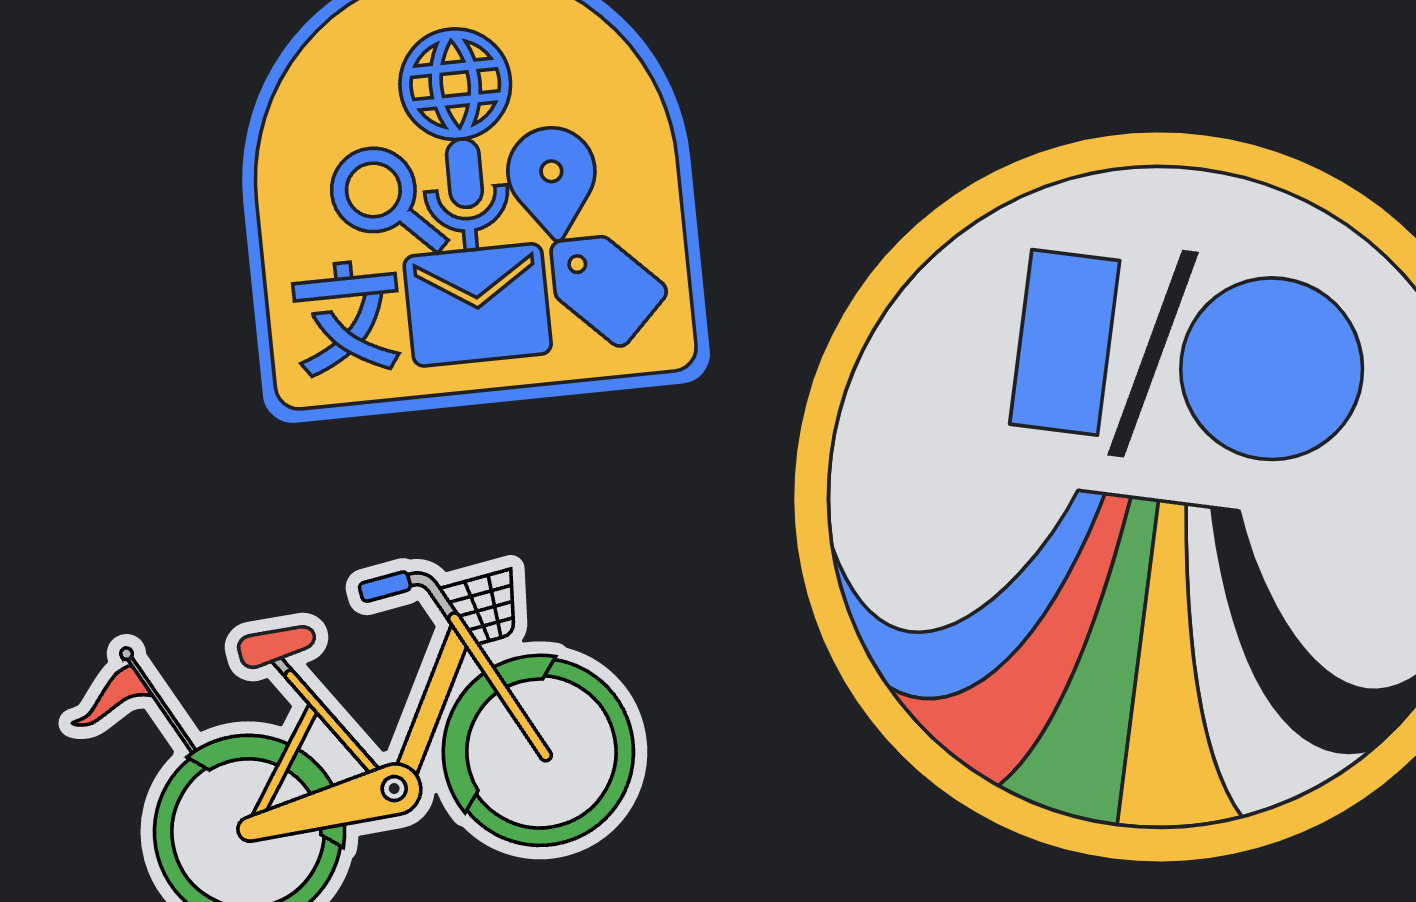 Various multi-coloured illustrated icons of Google I/O event against a black background including a bike, microphone, web icon and the I/O icon 